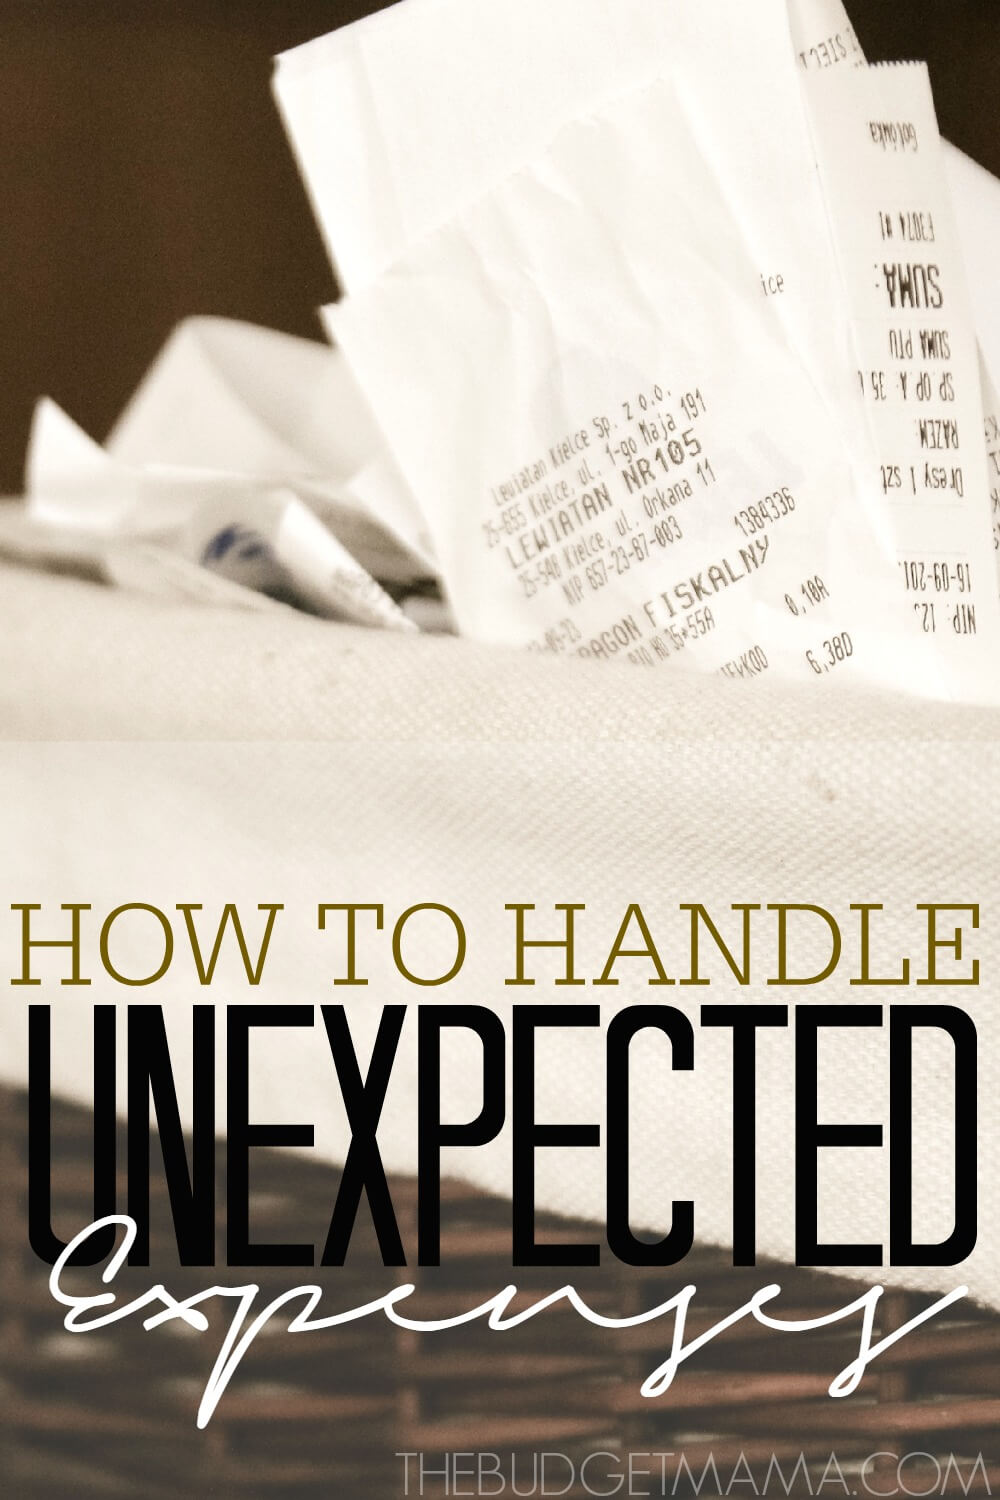 How to Handle Unexpected Expenses